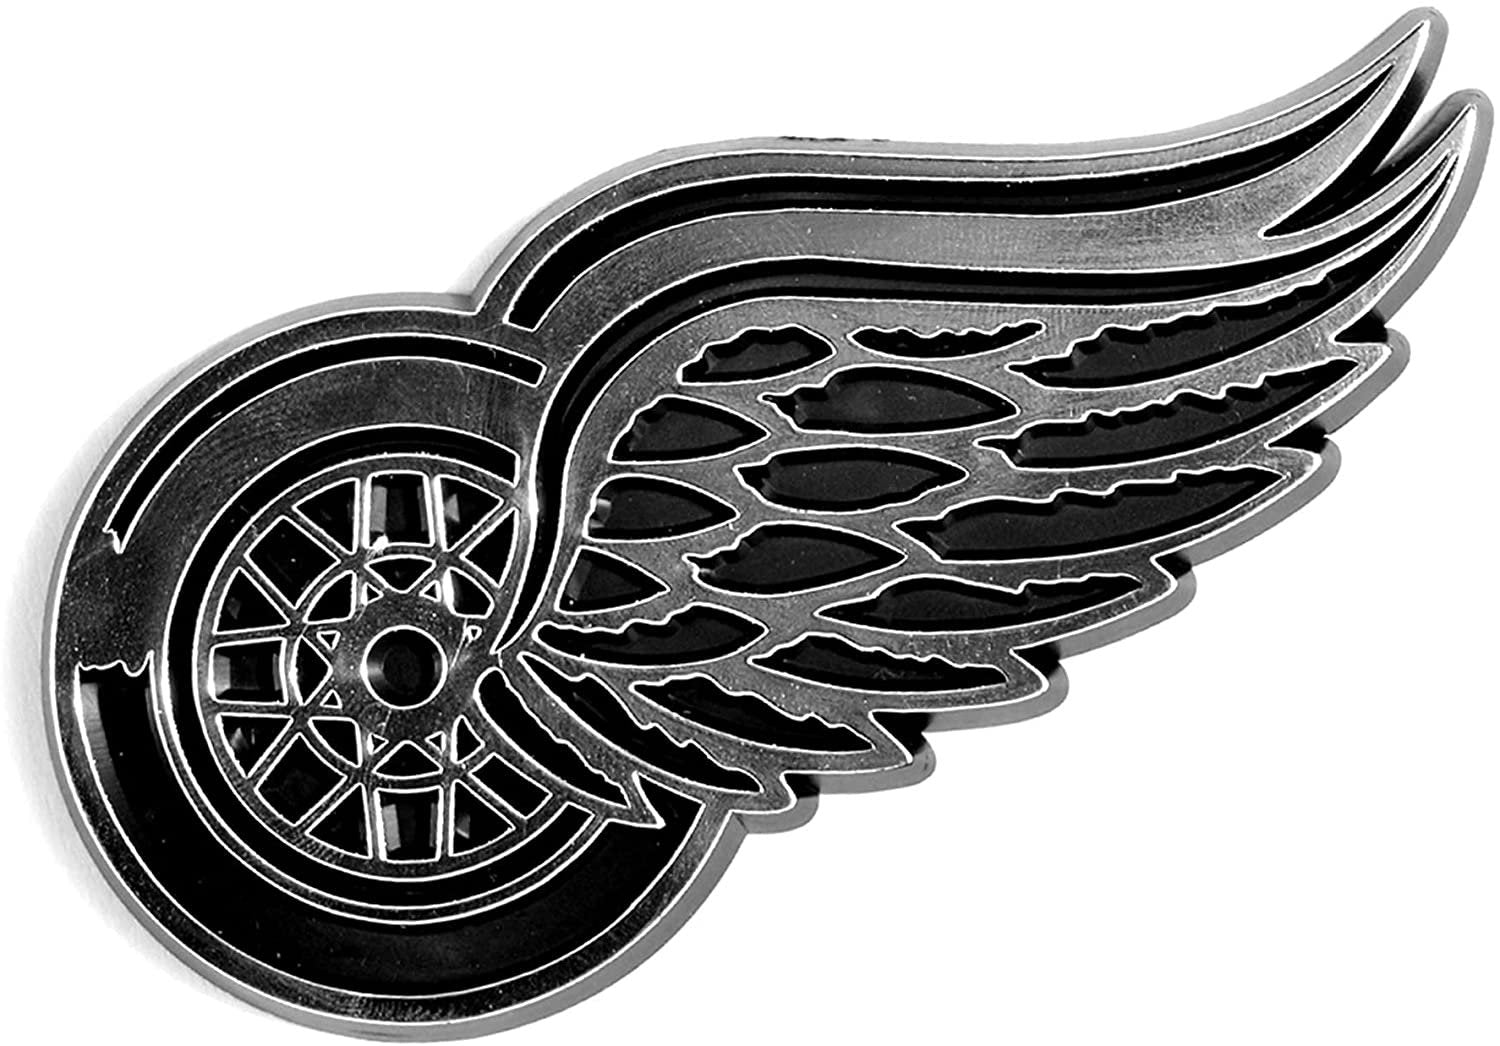 Detroit Red Wings Auto Emblem, Silver Chrome Color, Raised Molded Shape Cut Plastic, Adhesive Tape Backing